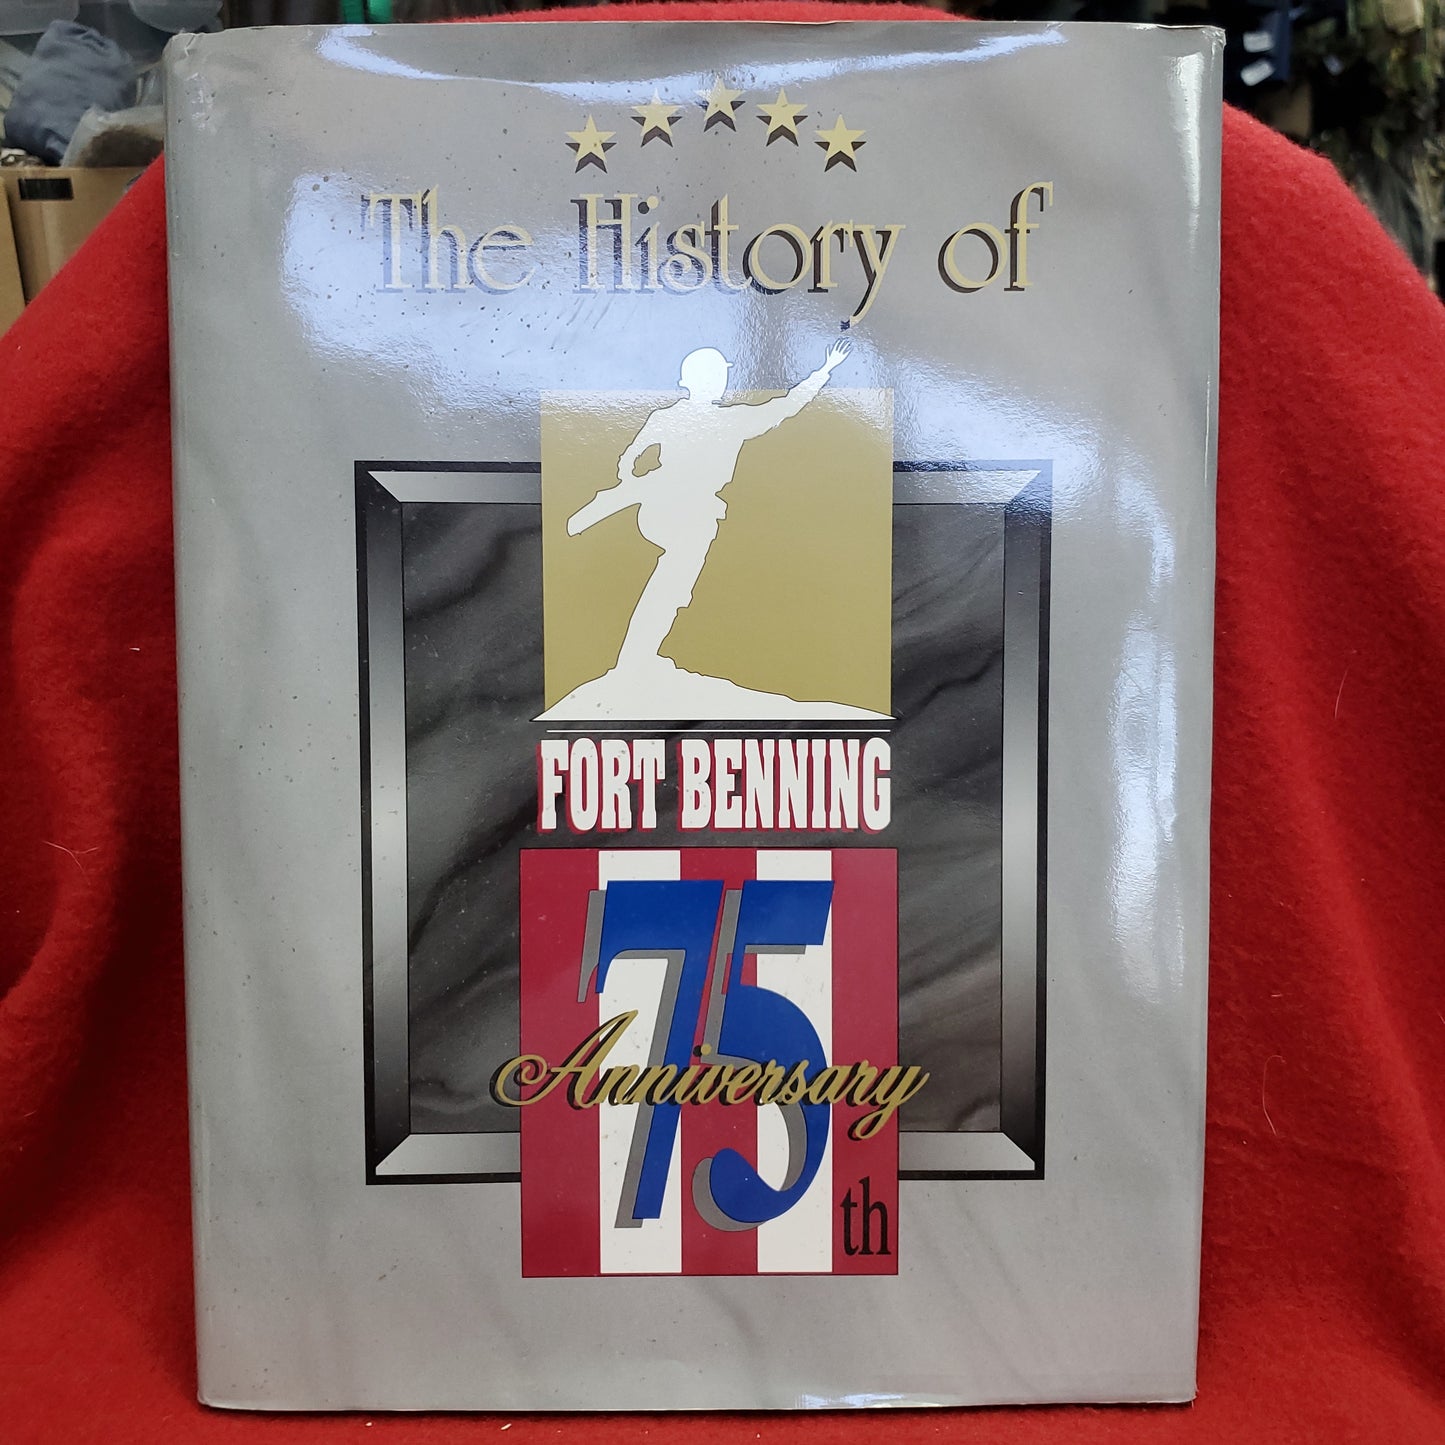 Vintage 1993 75th Anniversary "THE HISTORY OF FORT BENNING"  (27s)